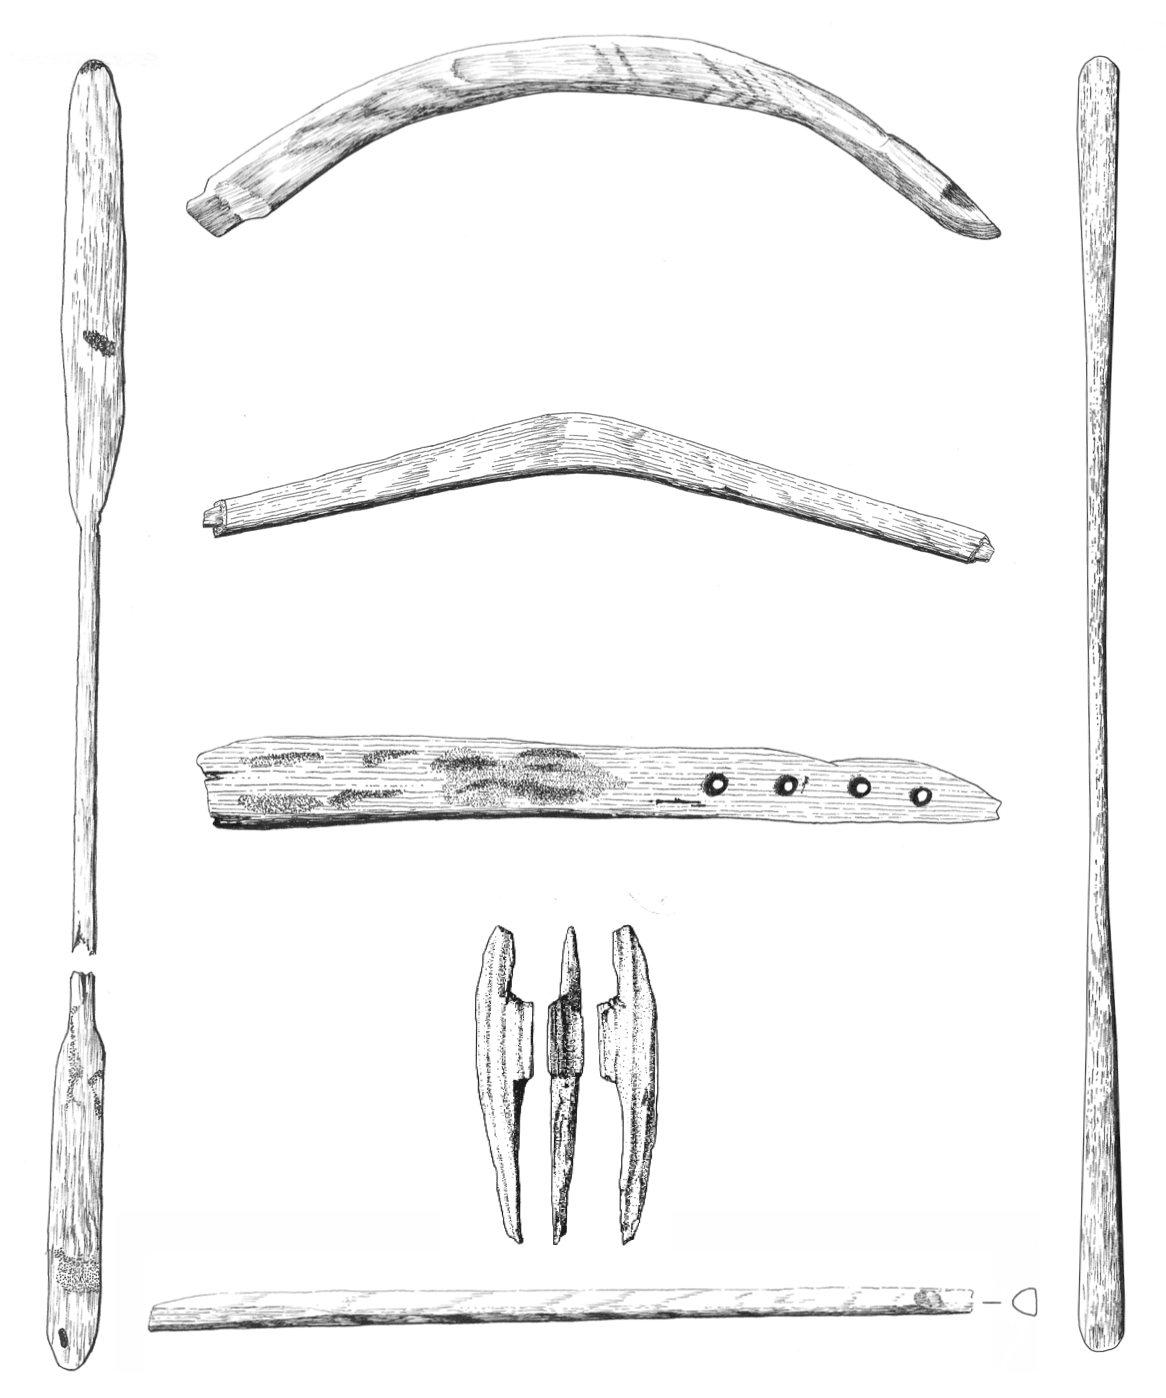 This drawing or image or illustration or depiction shows parts of kayaks though not at scale. Their are paddles, stringers and a deck member